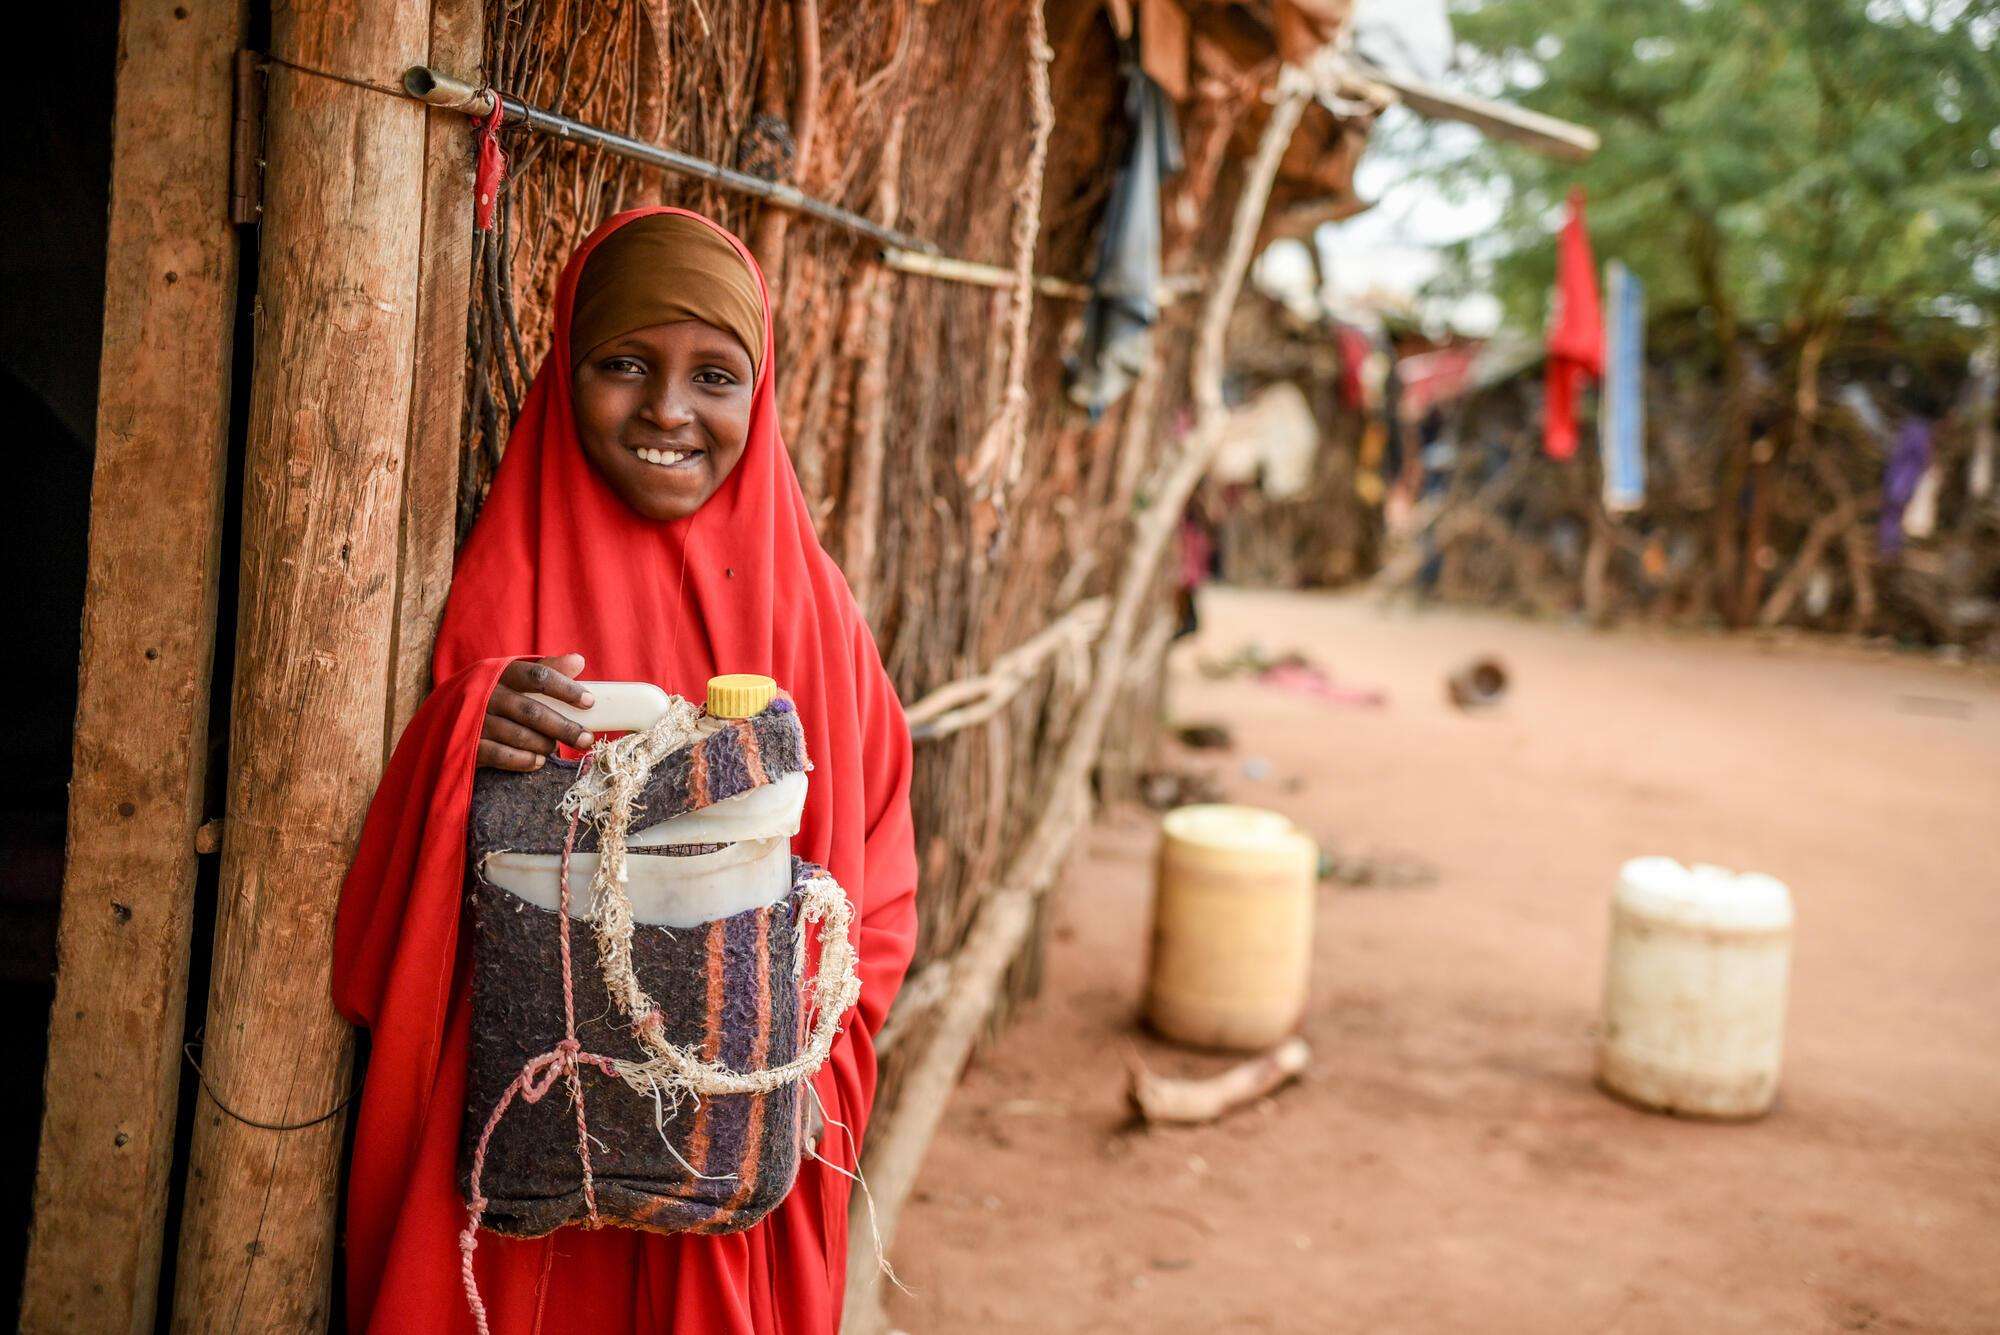 Ten-year-old Habiba, who lives with diabetes, holds the cooler bag in which she stores her insulin injections. Kenya, May 2021.